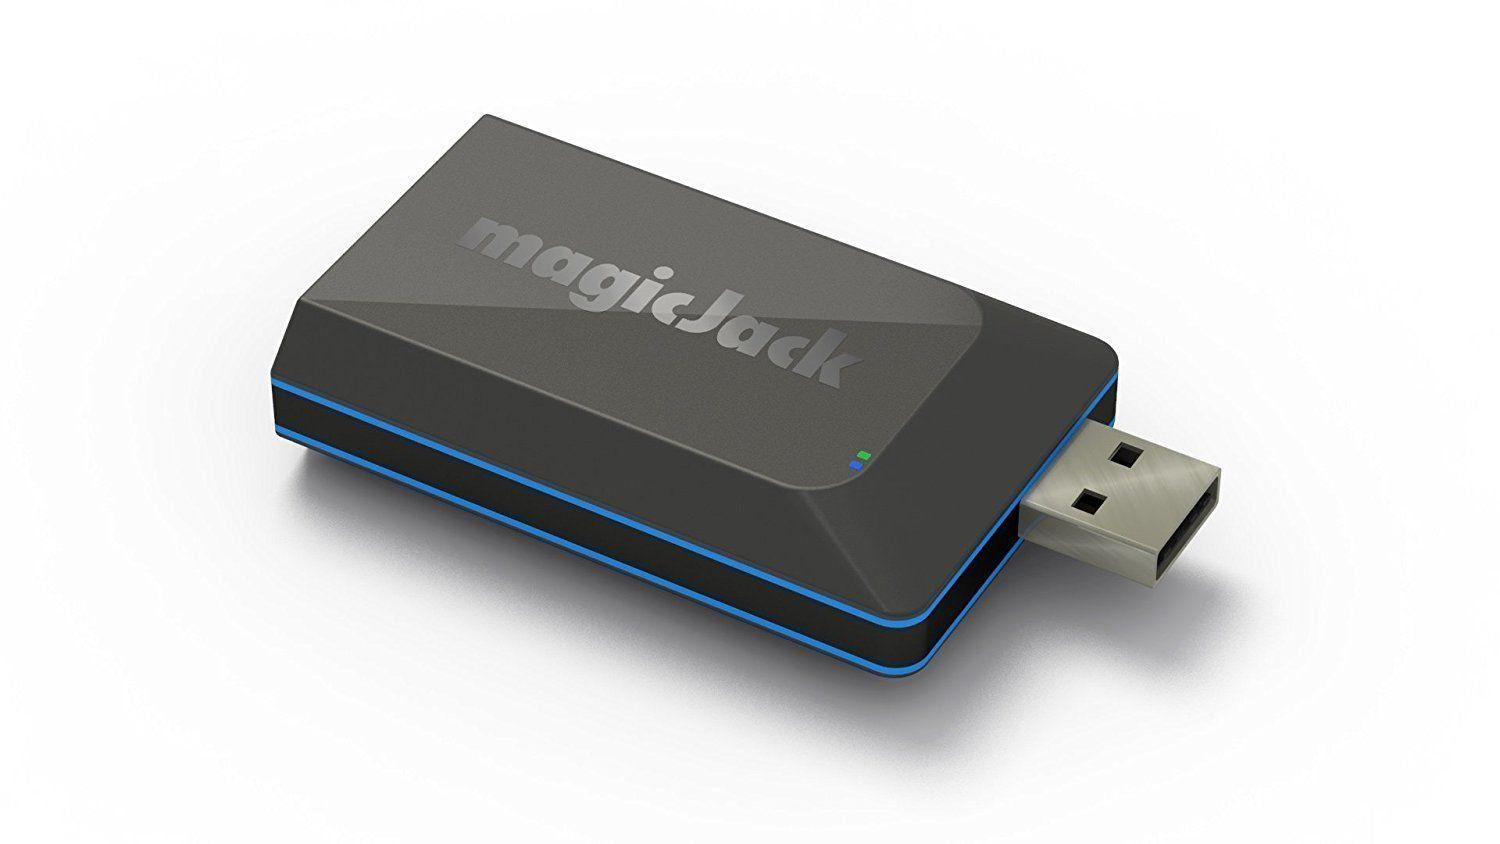 MagicJack USB device for unlimited internet calls